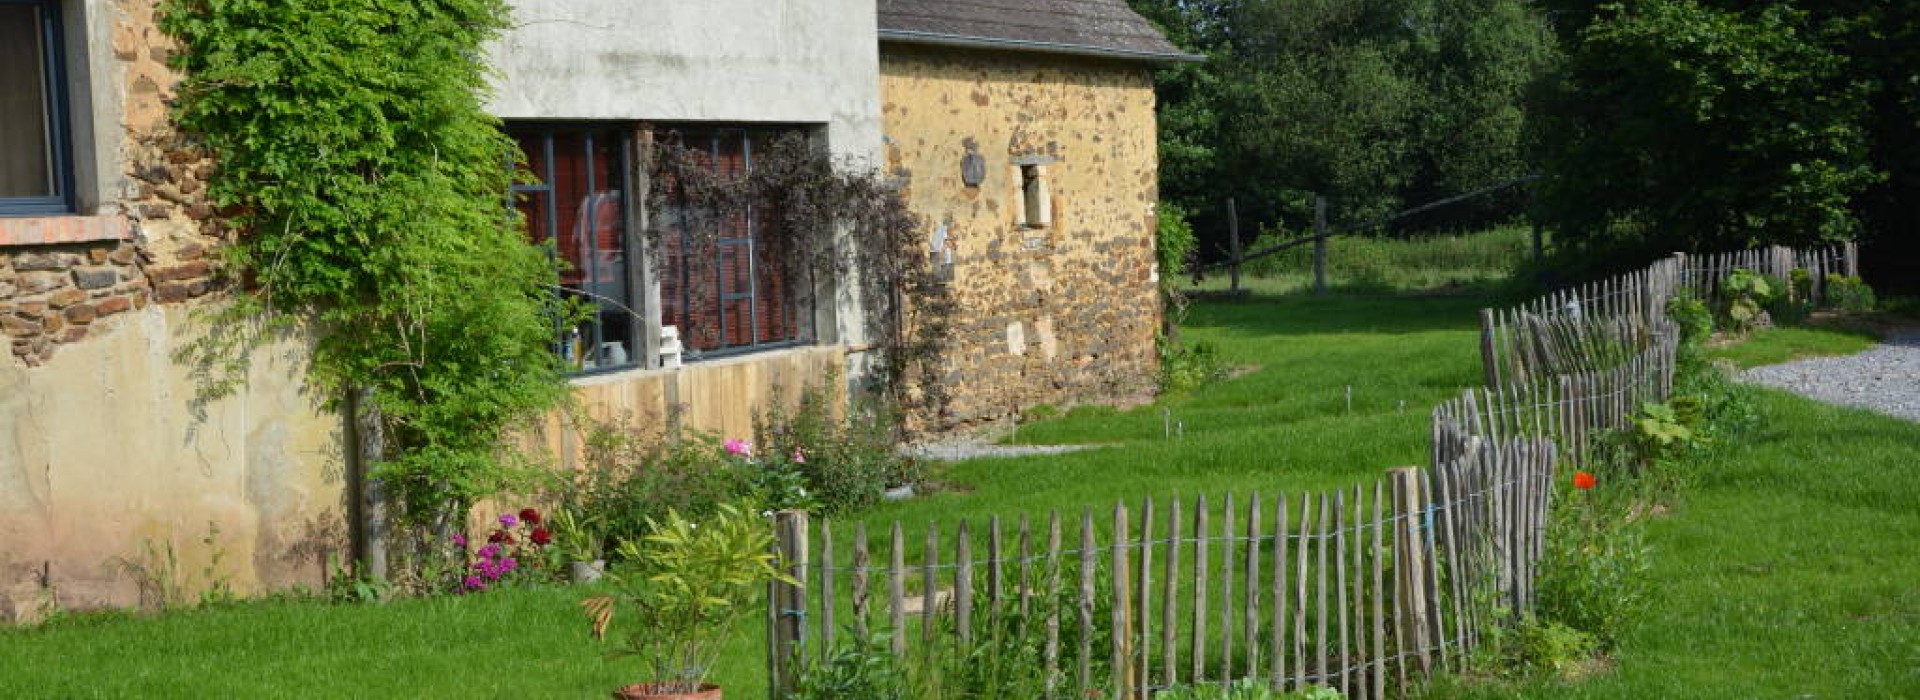 GITE L'ATELIER AND COW